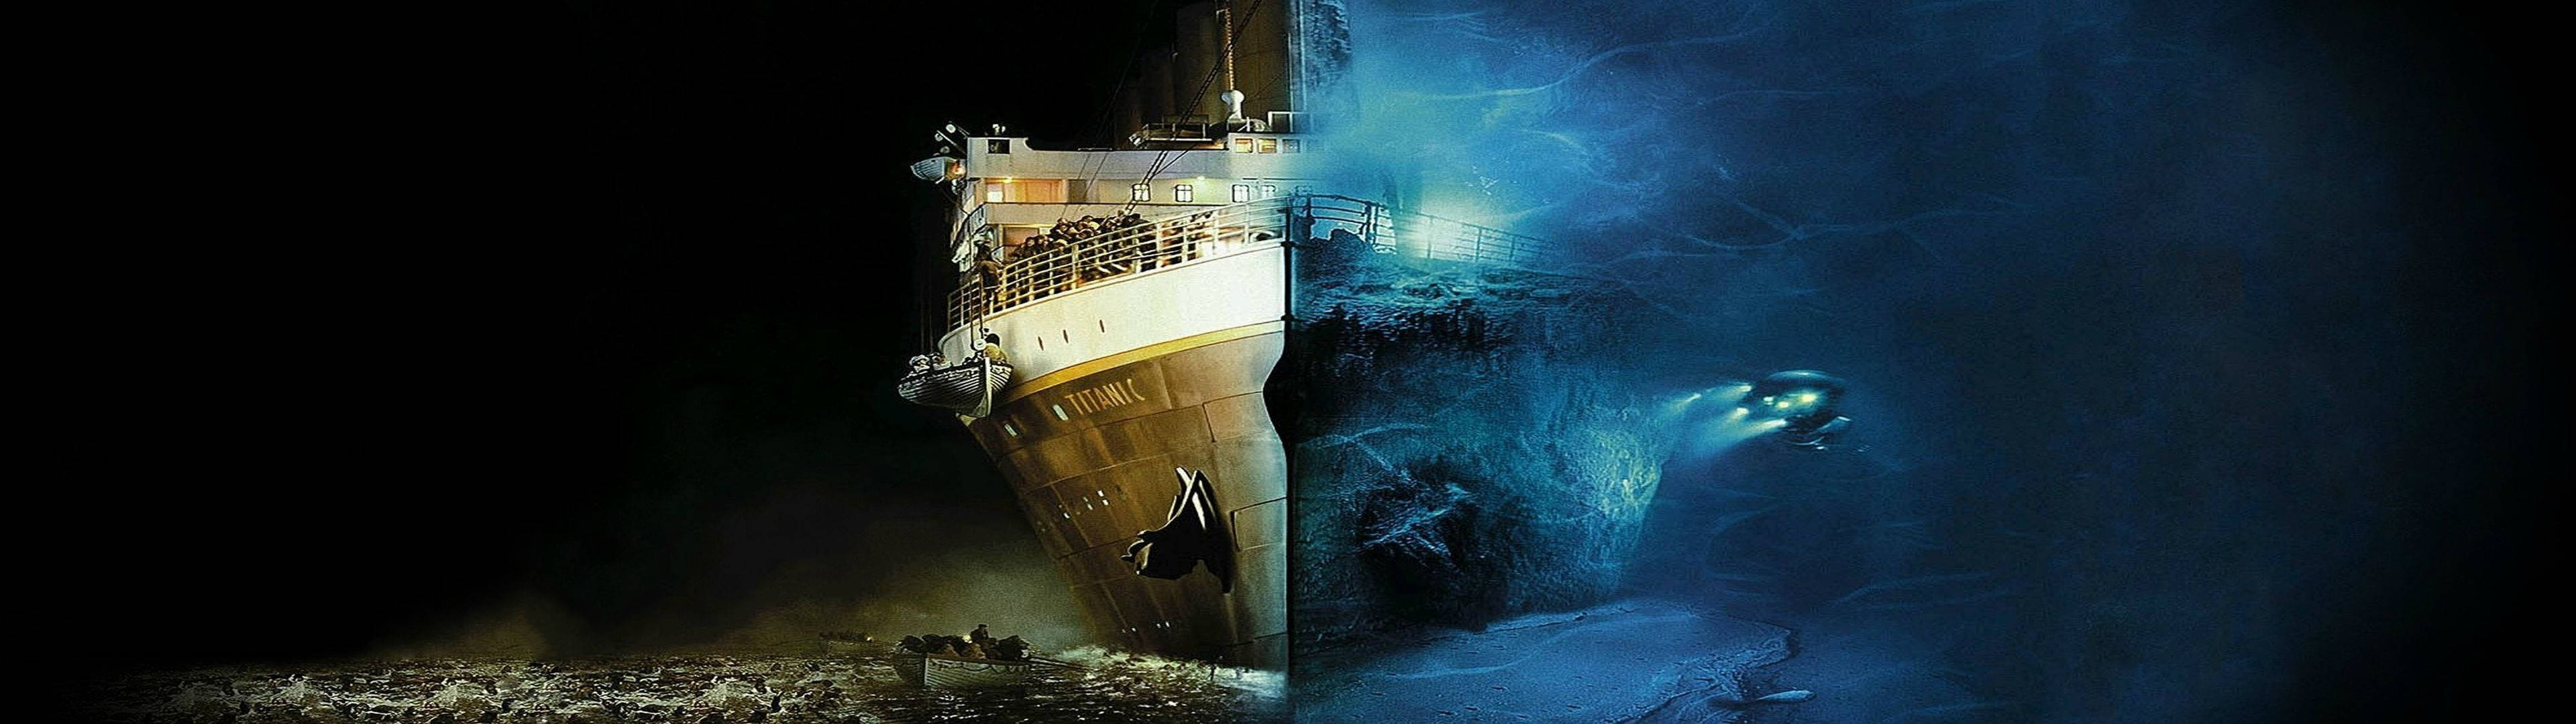 Explore the depths of the wreck of the Titanic with this dual-screen wallpaper. Wallpaper